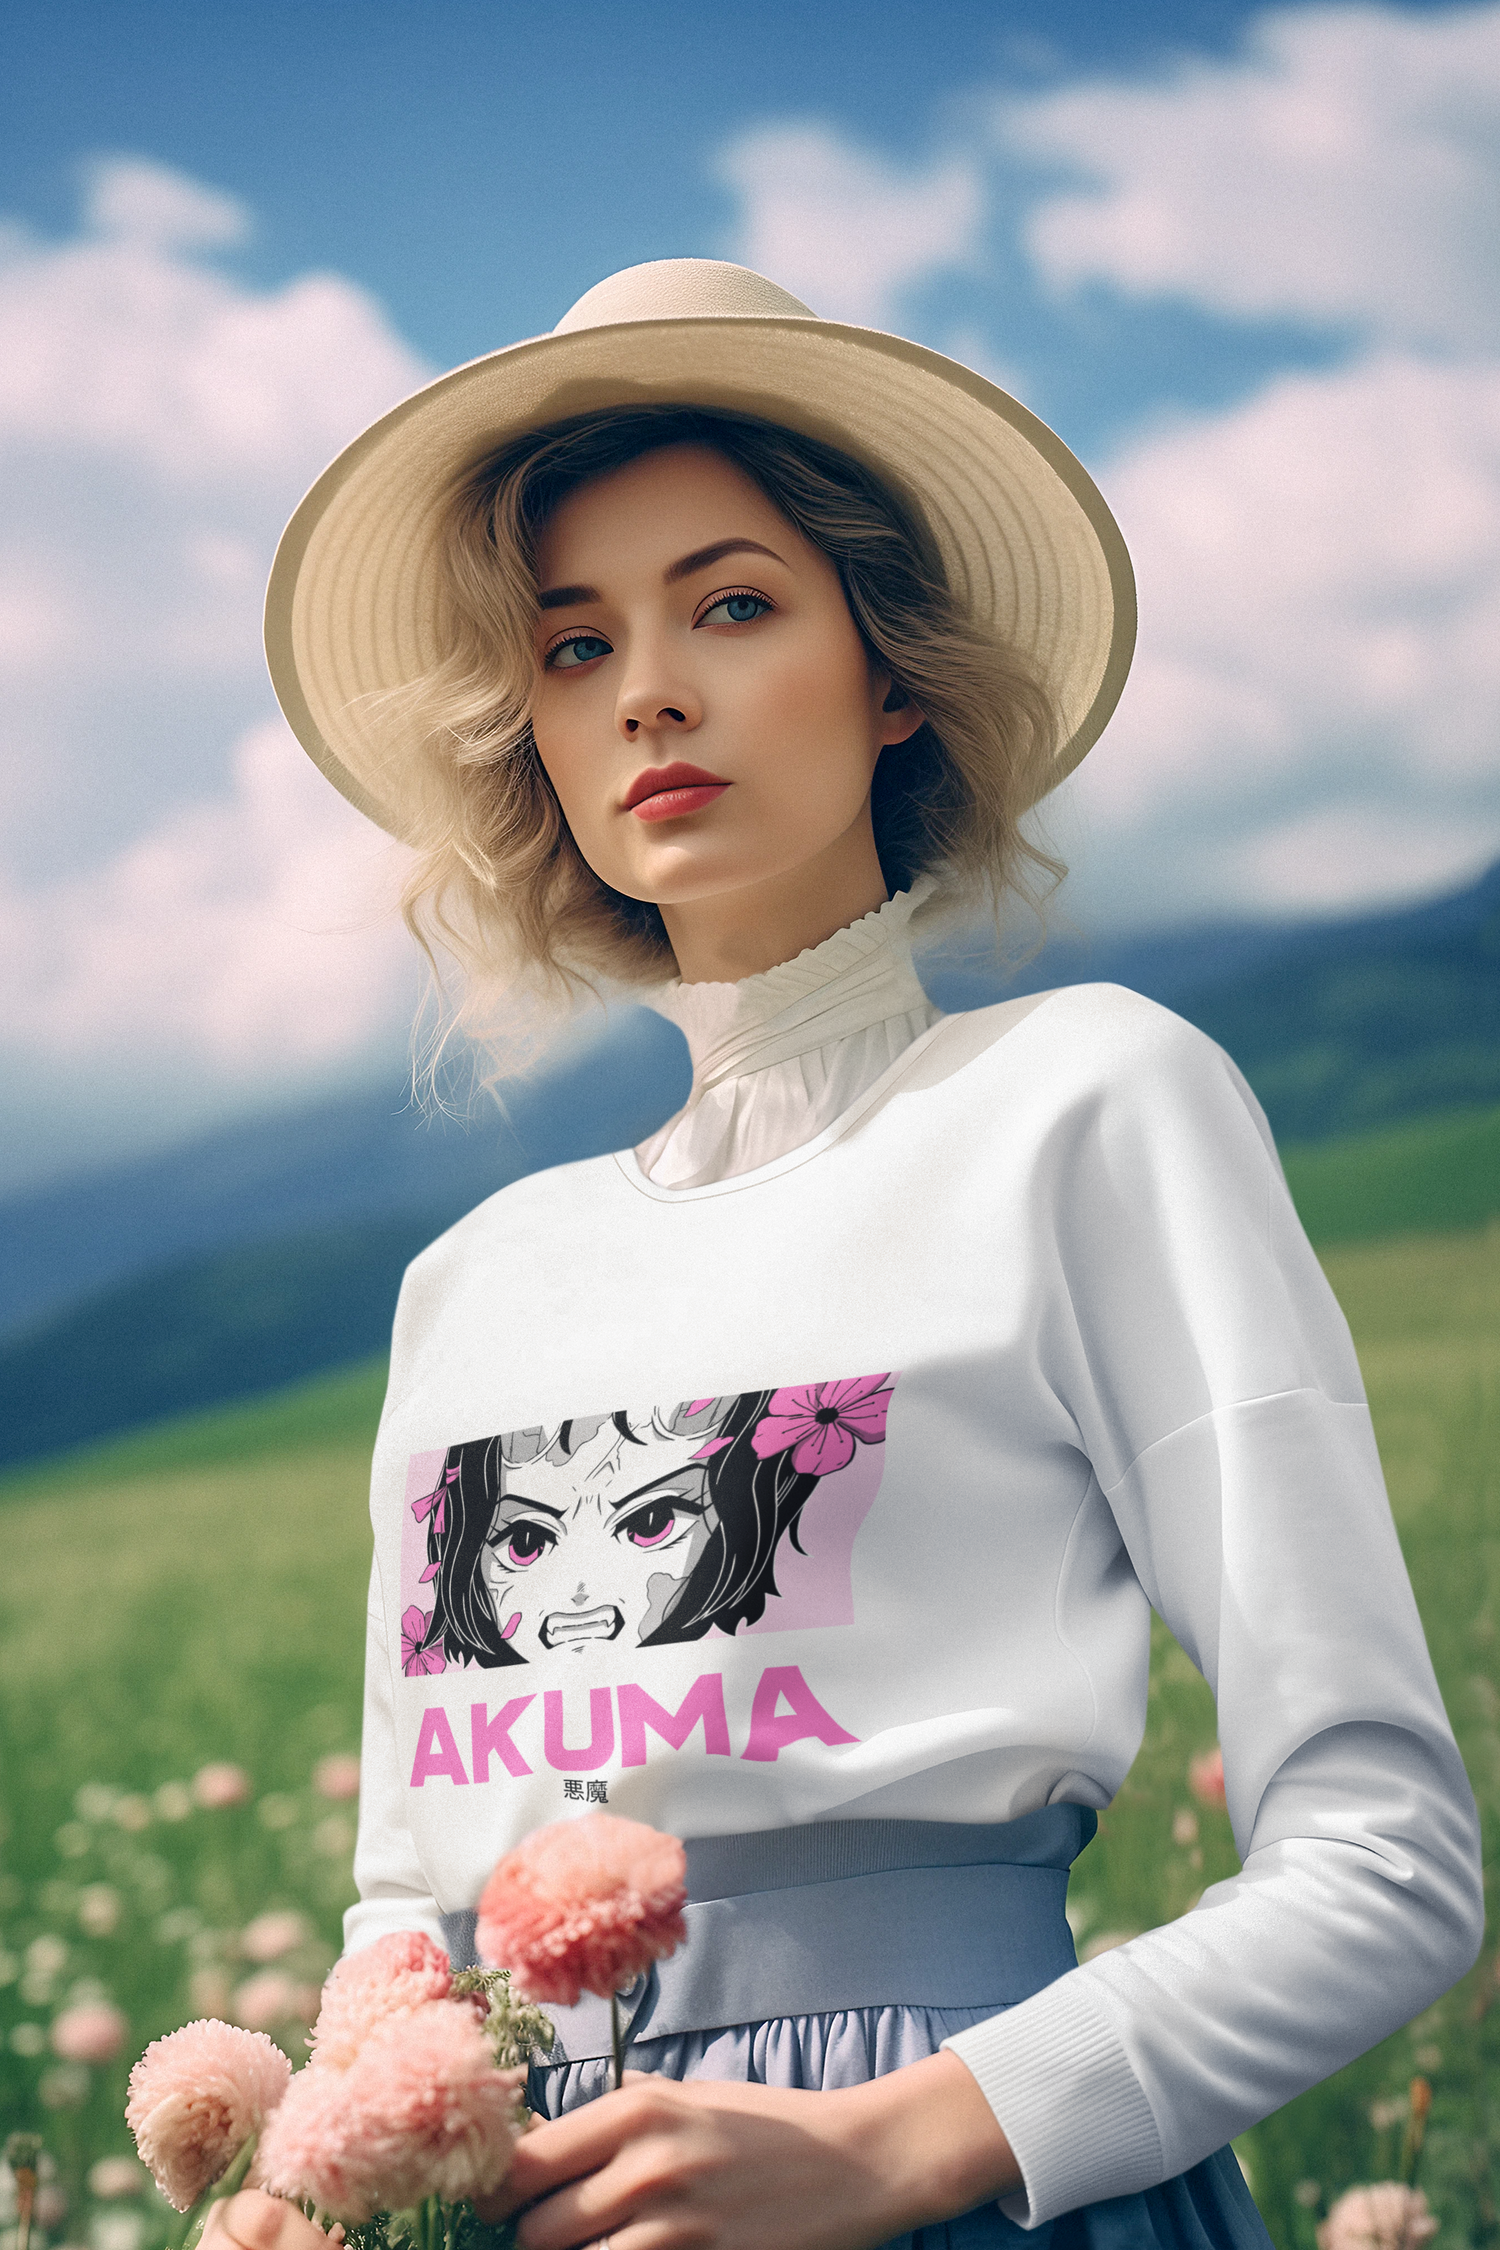 Fashionable woman in Syntax Style Hub attire, wearing a graphic sweatshirt paired with a stylish hat, set against a serene natural backdrop.